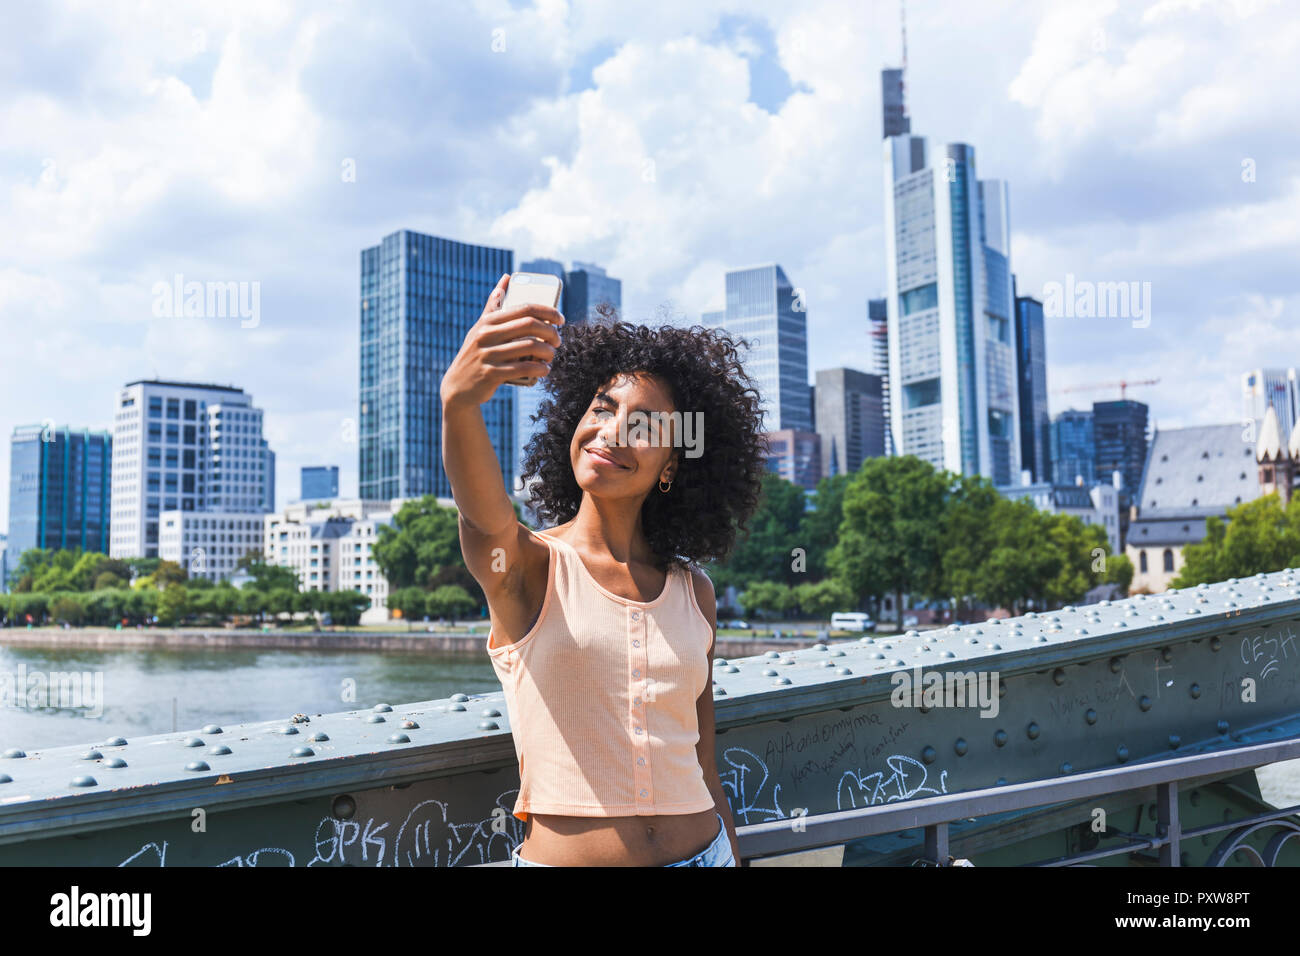 Germany, Frankfurt, portrait of content young woman with curly hair taking selfie in front of skyline Stock Photo